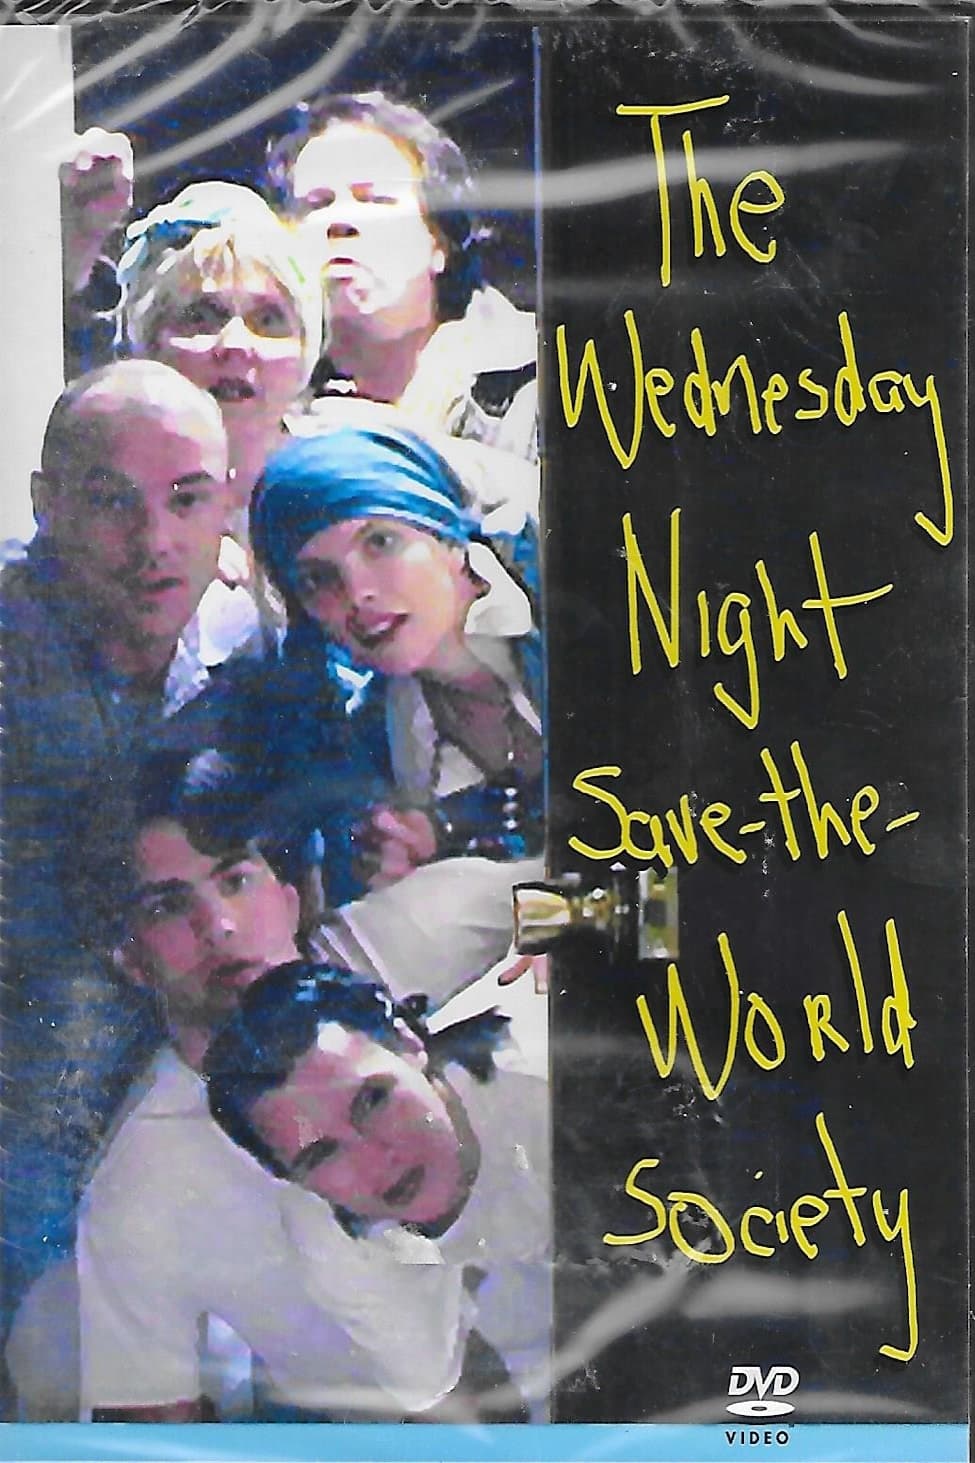 The Wednesday Night Save the World Society